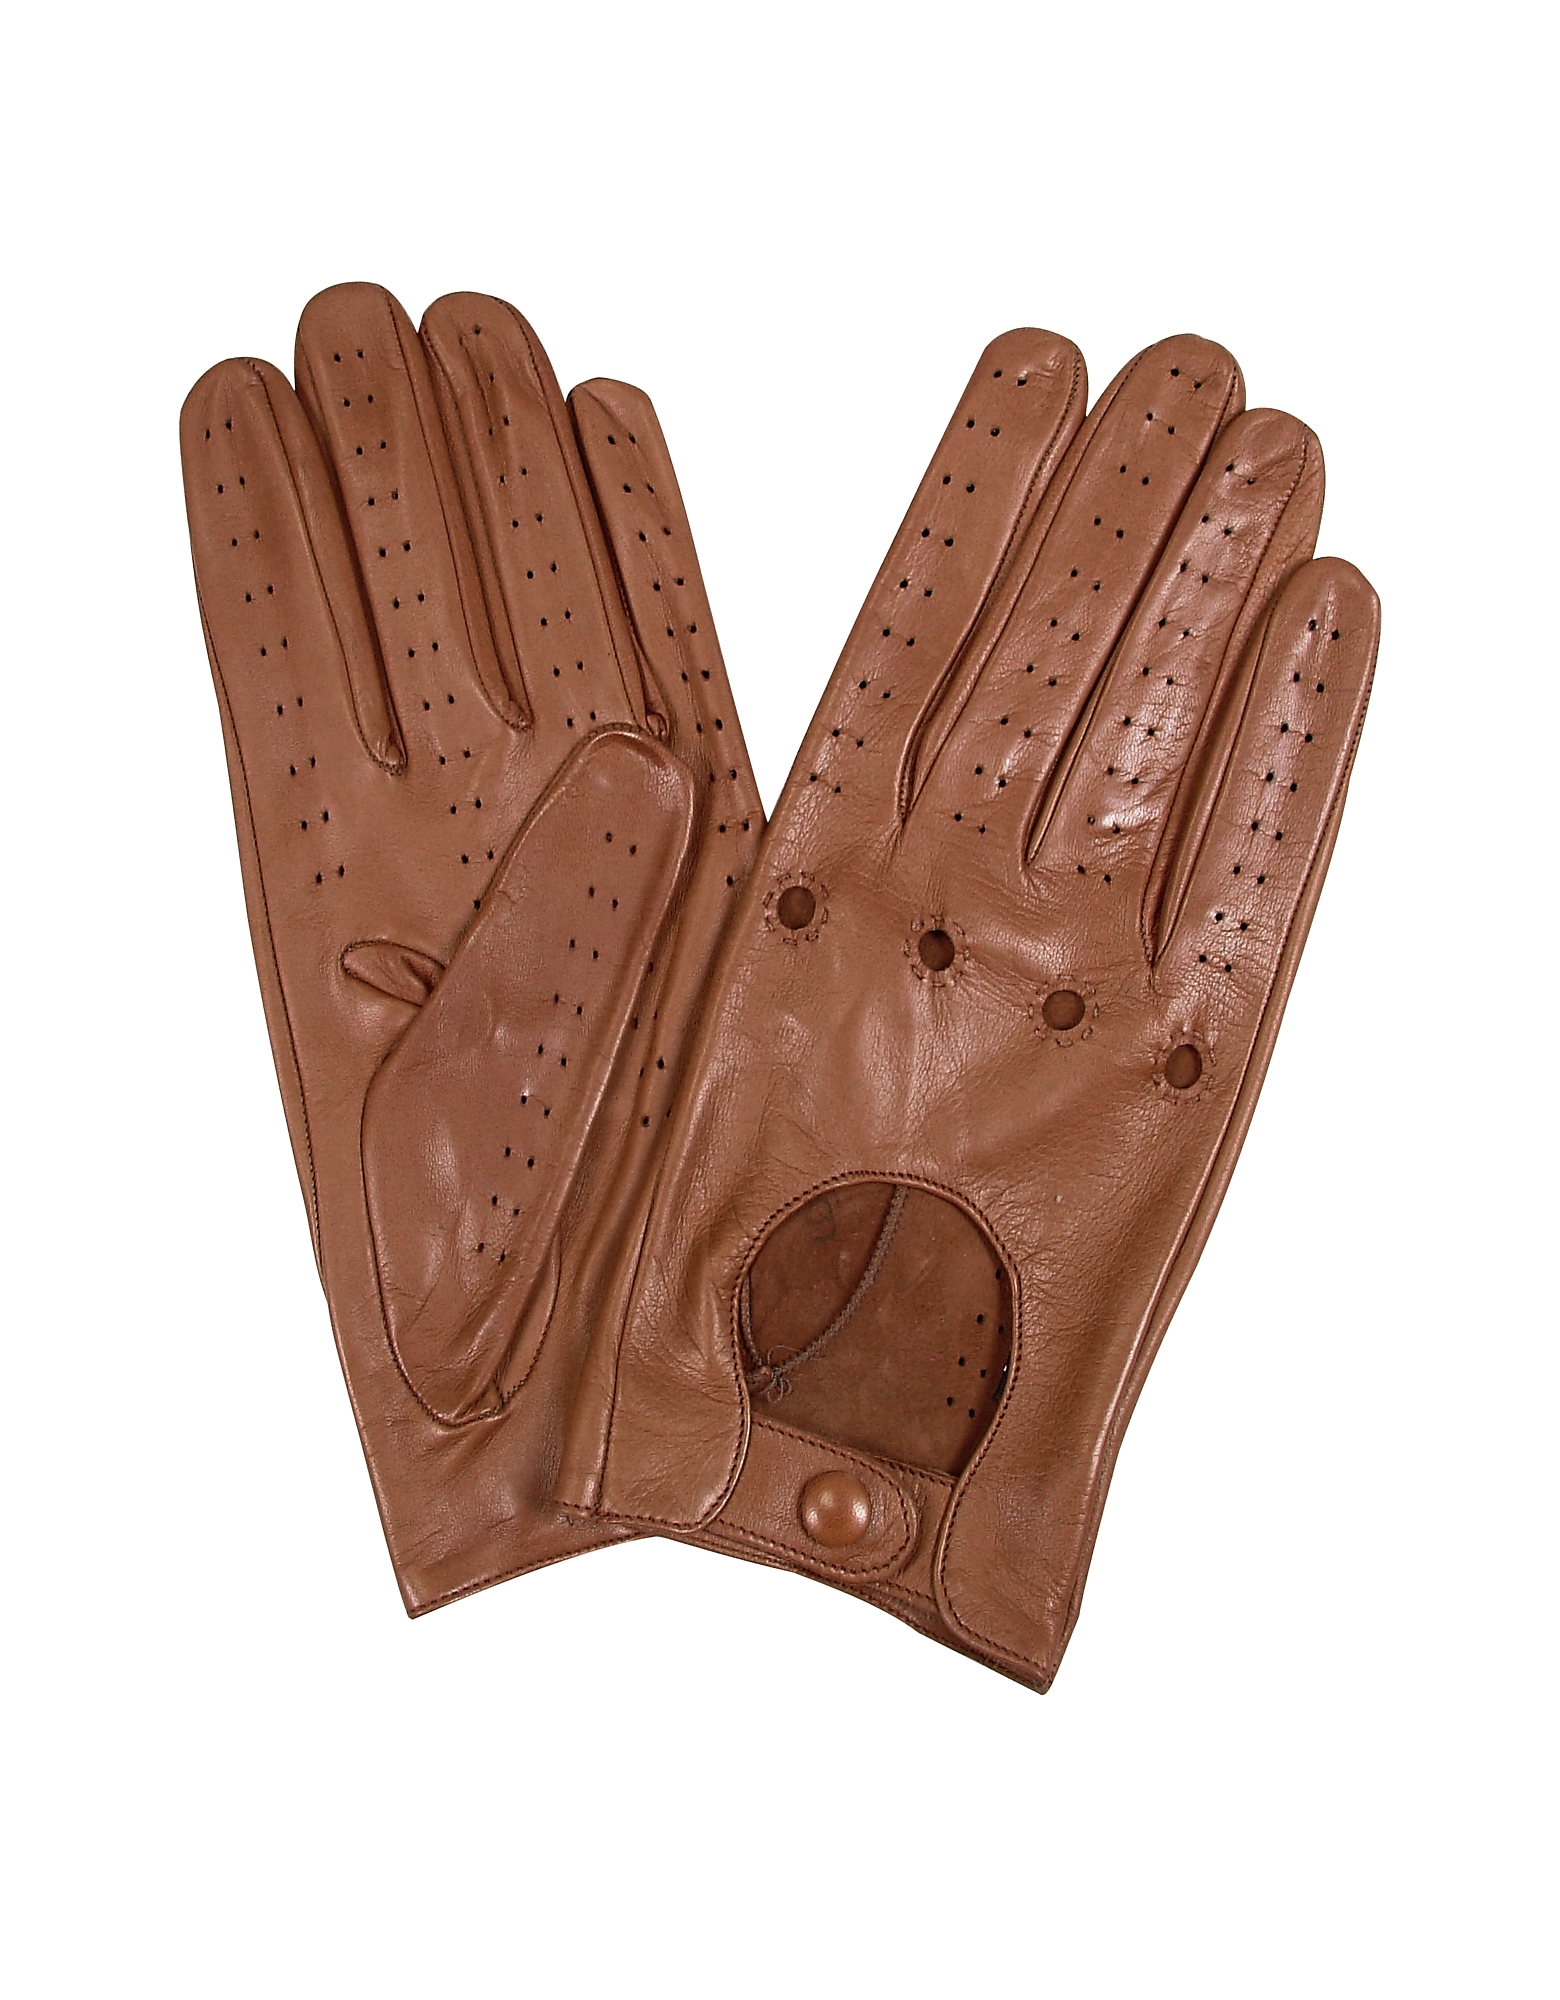 Forzieri Women's Gloves Women's Tan Perforated Italian Leather Driving Gloves